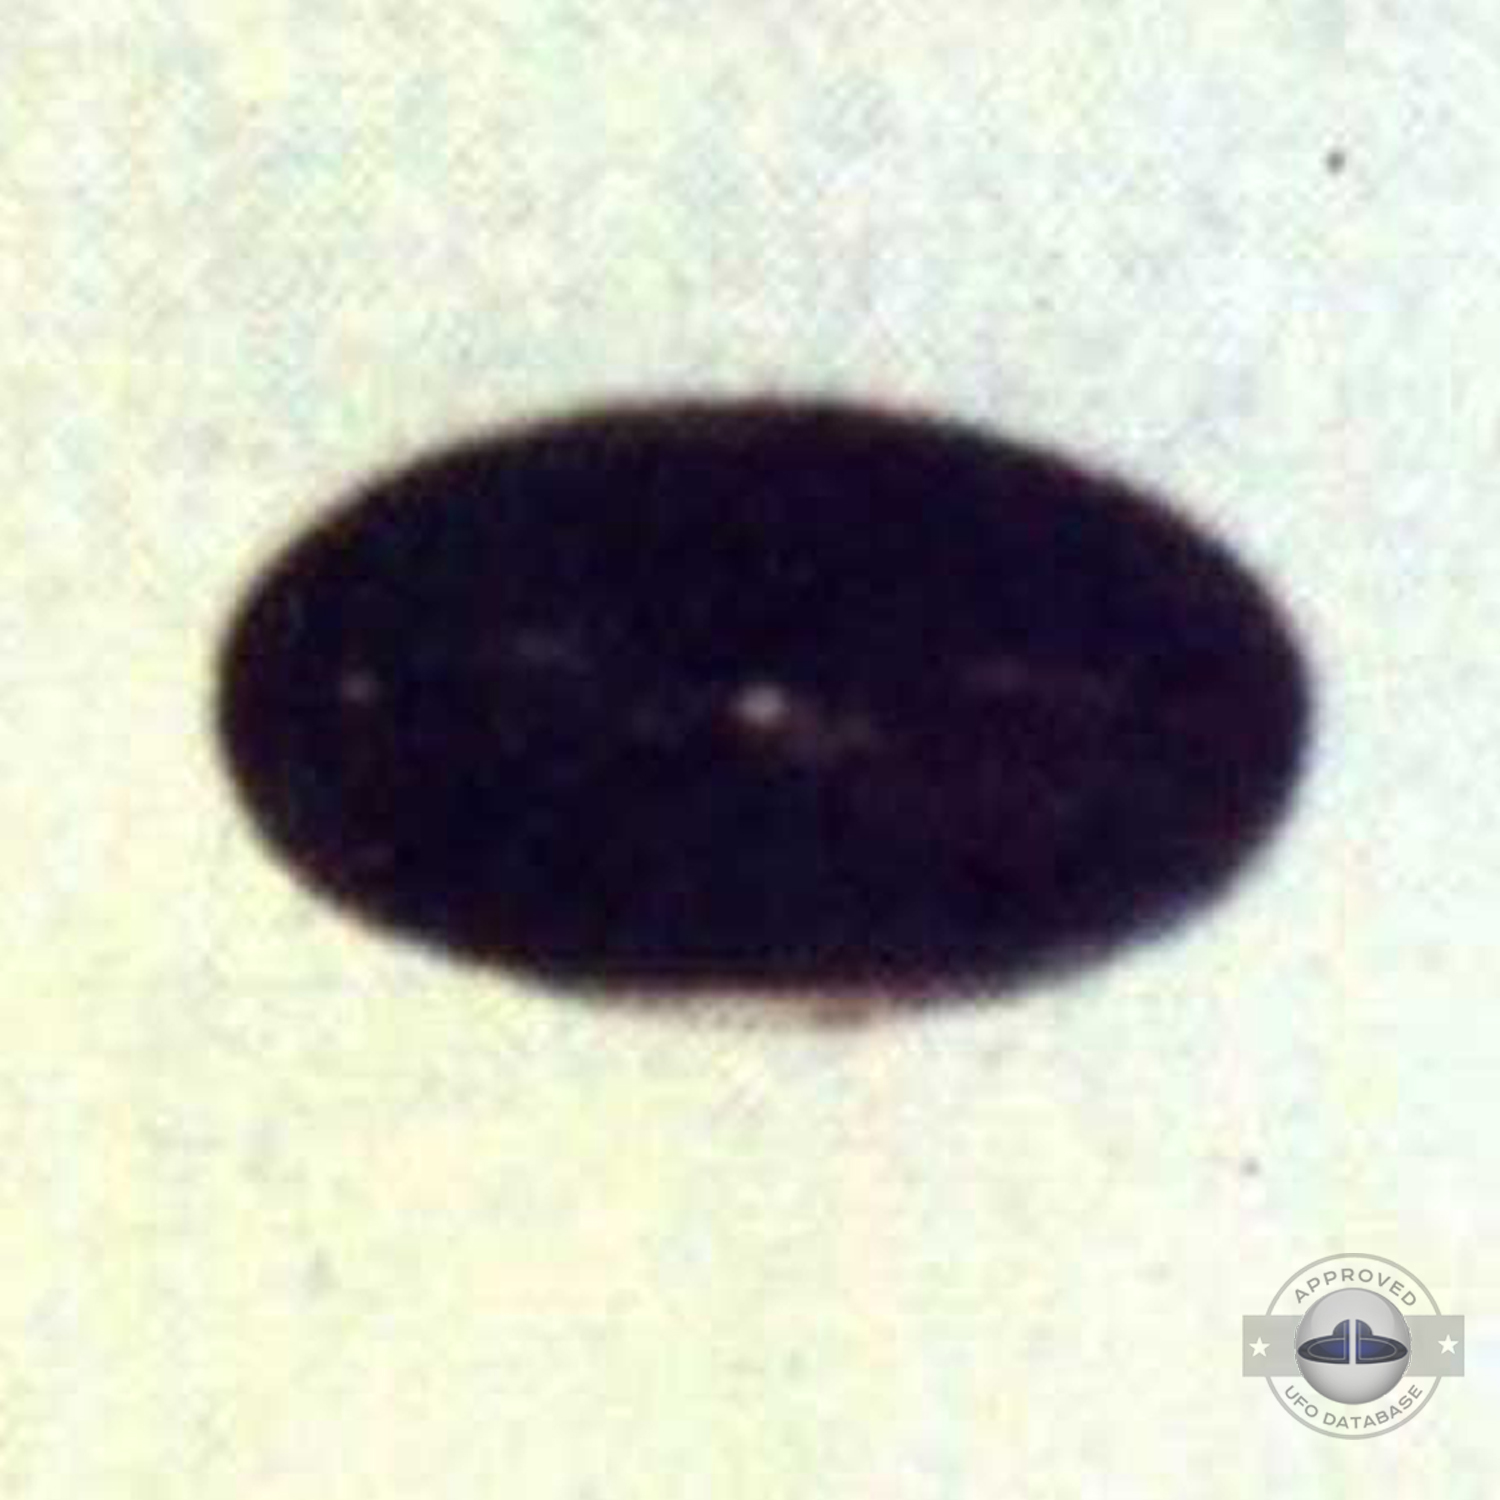 Ufo picture taken by Amaury Rivera who says that he was abducted also UFO Picture #68-8